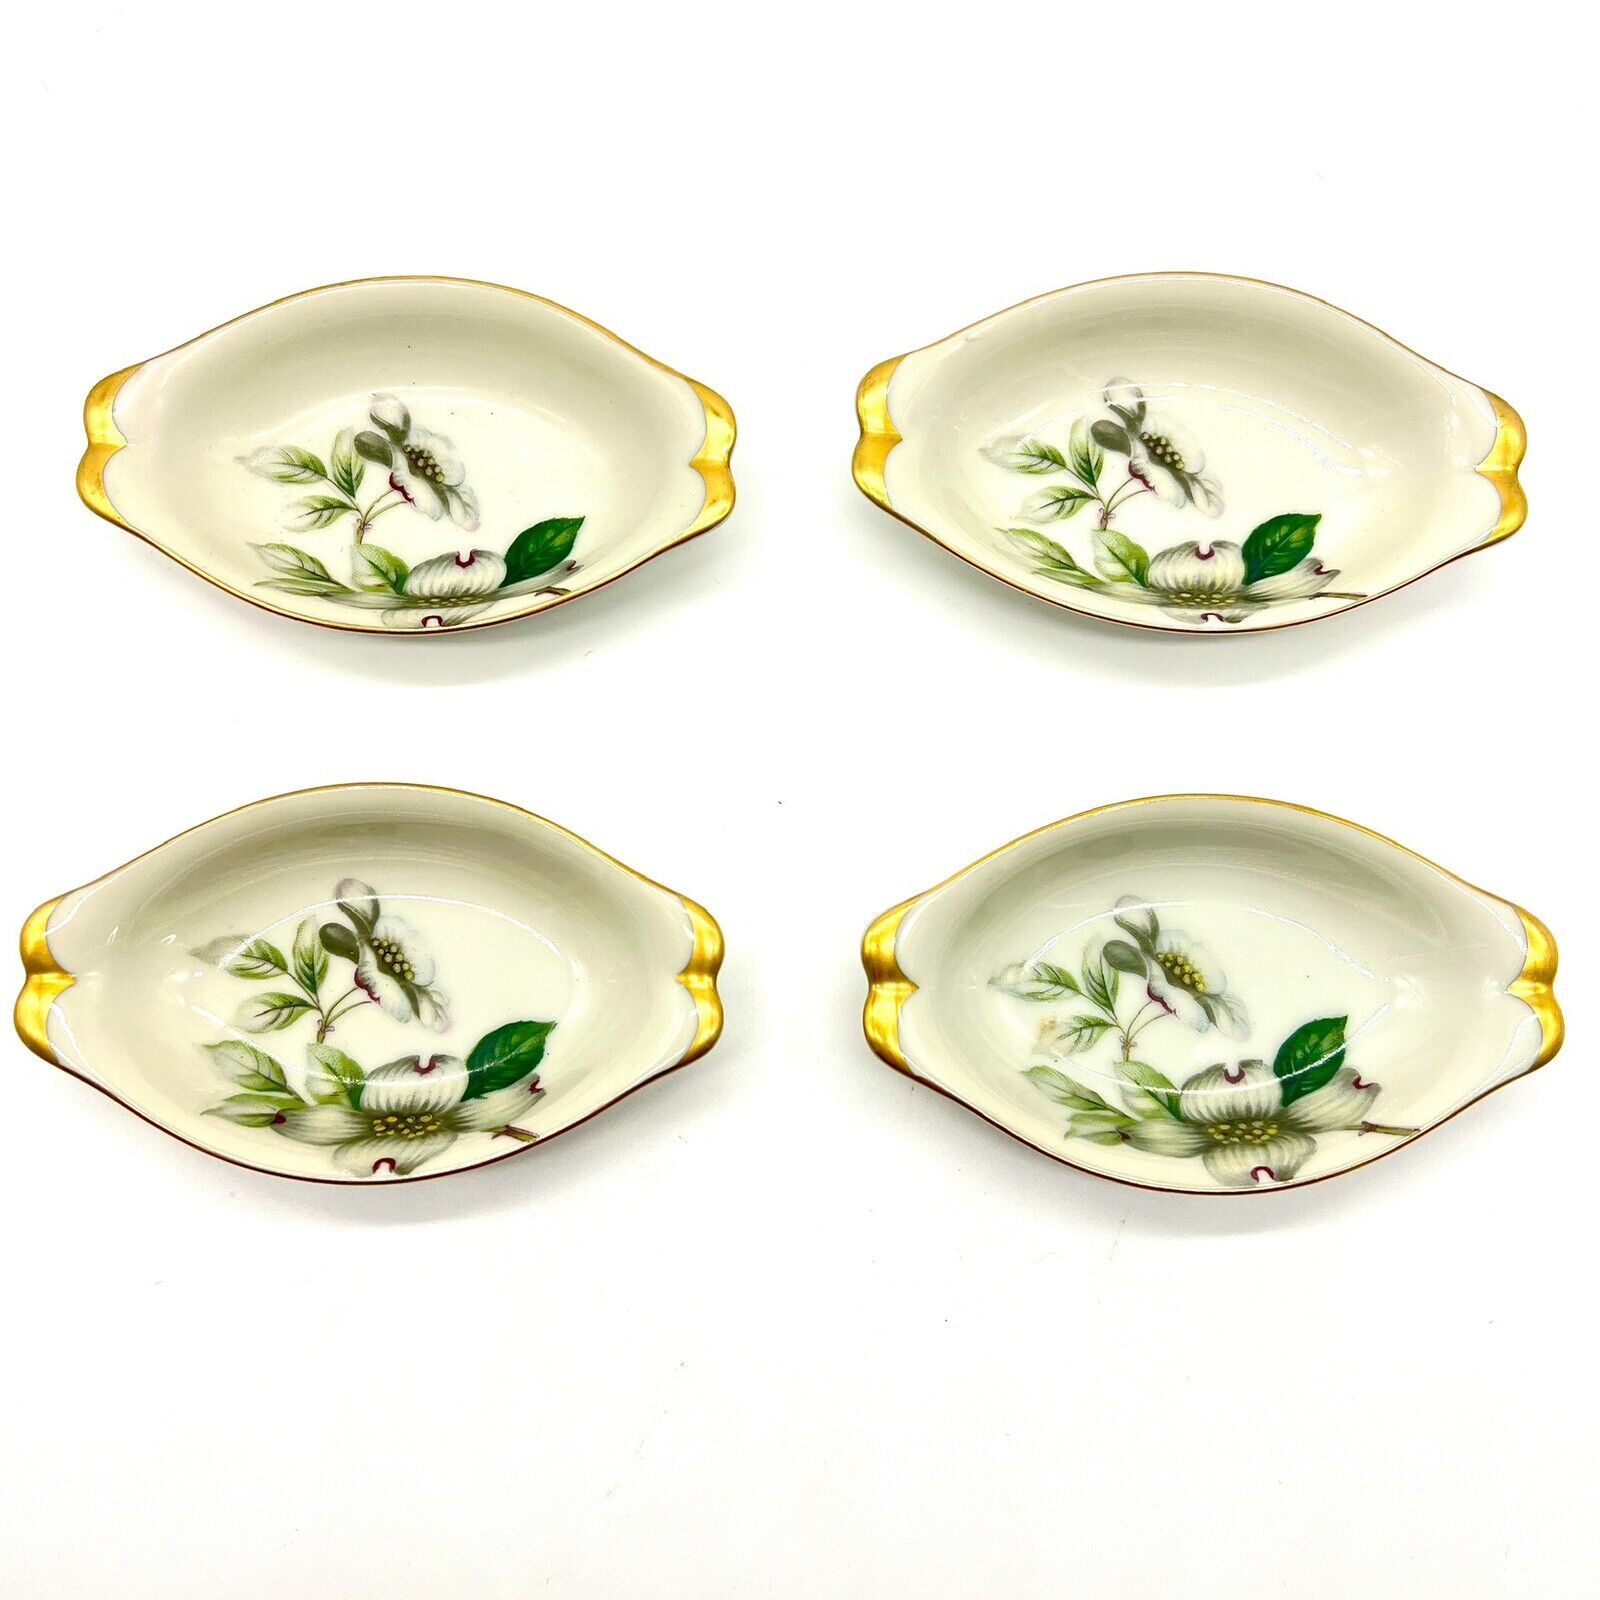 Vintage Meito Norleans Salt Cellars Butter Pats China Livonia Dogwood Japan 4pc